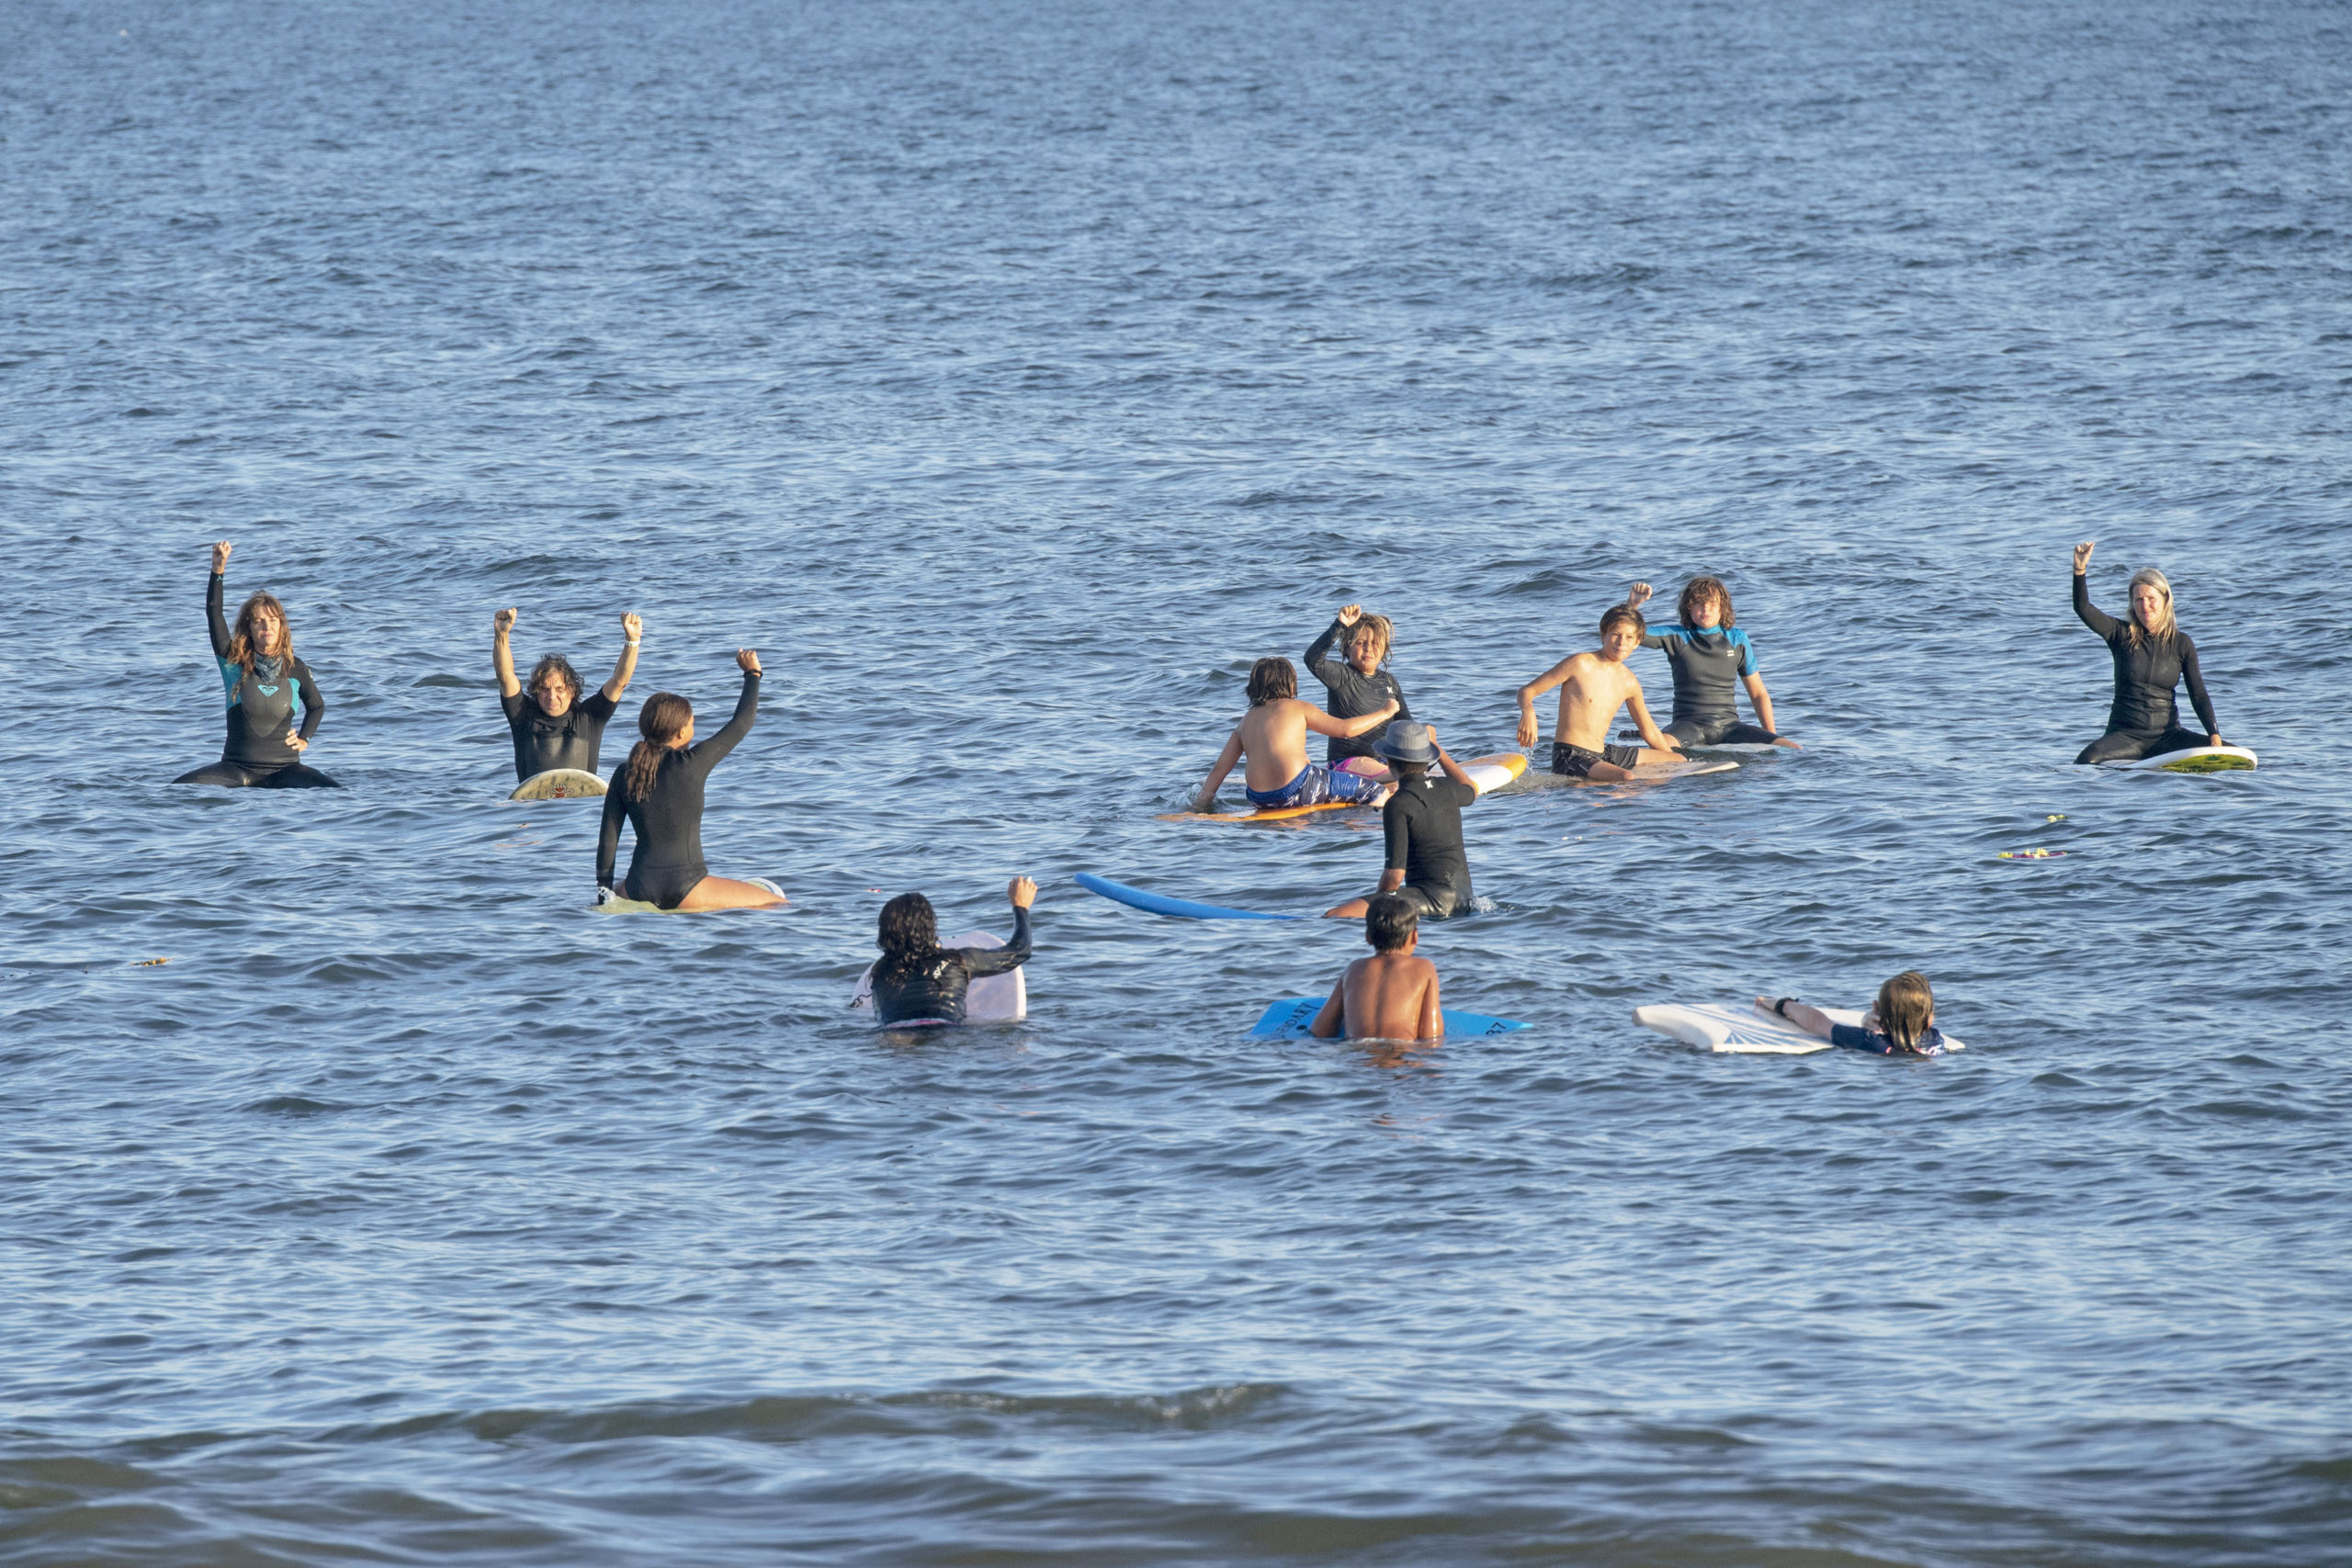 Paddlers raise their arms in solidarity while out on the water during the Paddle Out in Solidarity event in support of  Black Lives Matter on the beach at the end of Napeague Lane in Amagansett on August 26.    MICHAEL HELLER